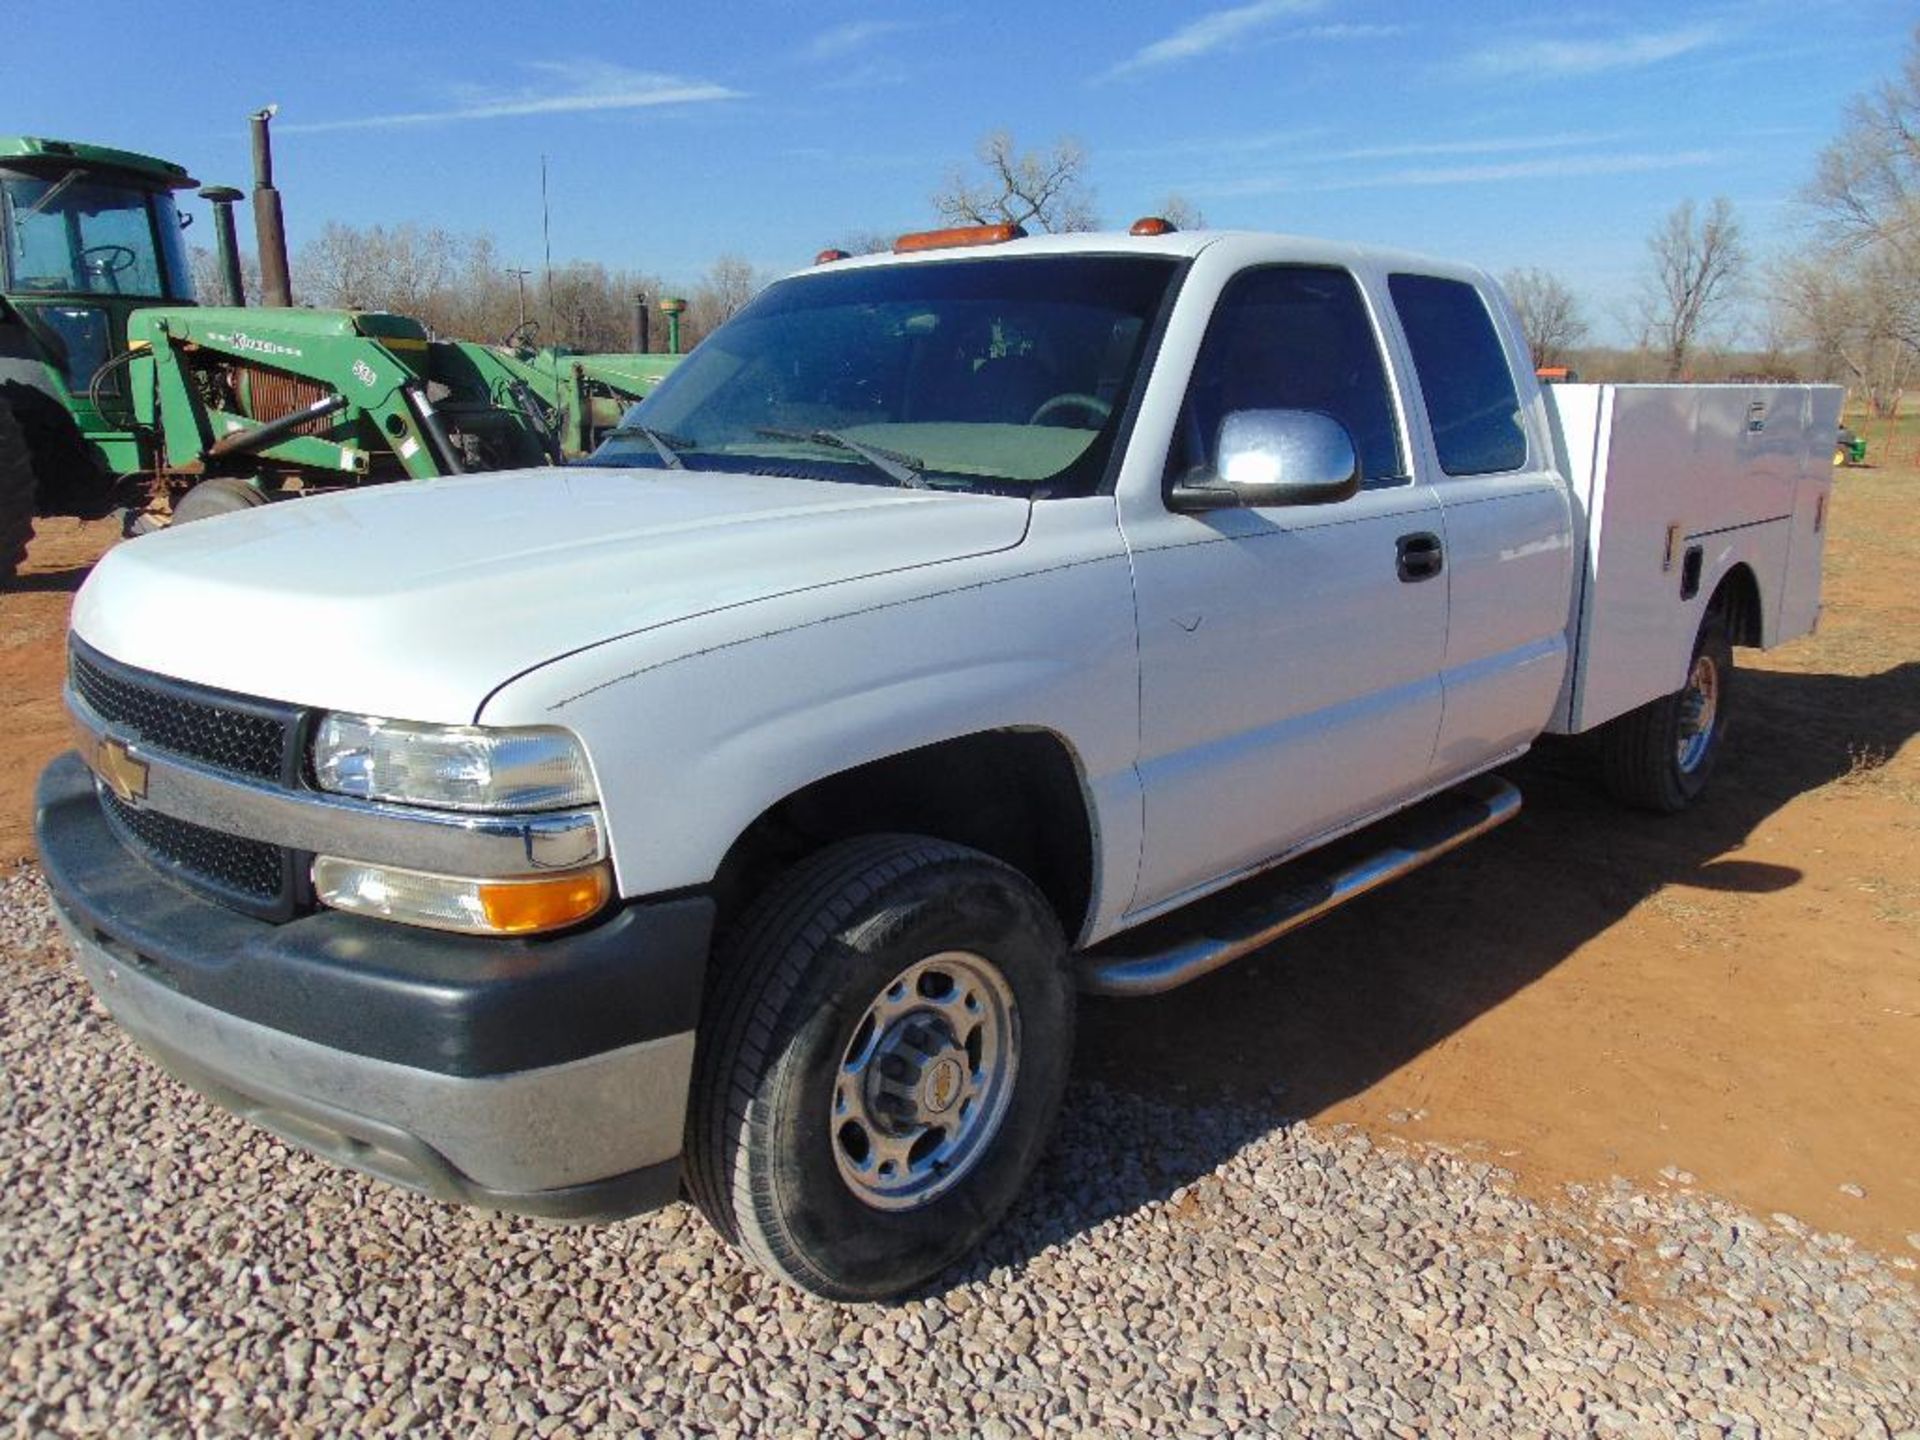 2001 Chevy 2500 Pickup, s/n 1gchc29u91e227056, v8 eng, auto trans, utility bed, od reads 340252 - Image 3 of 10